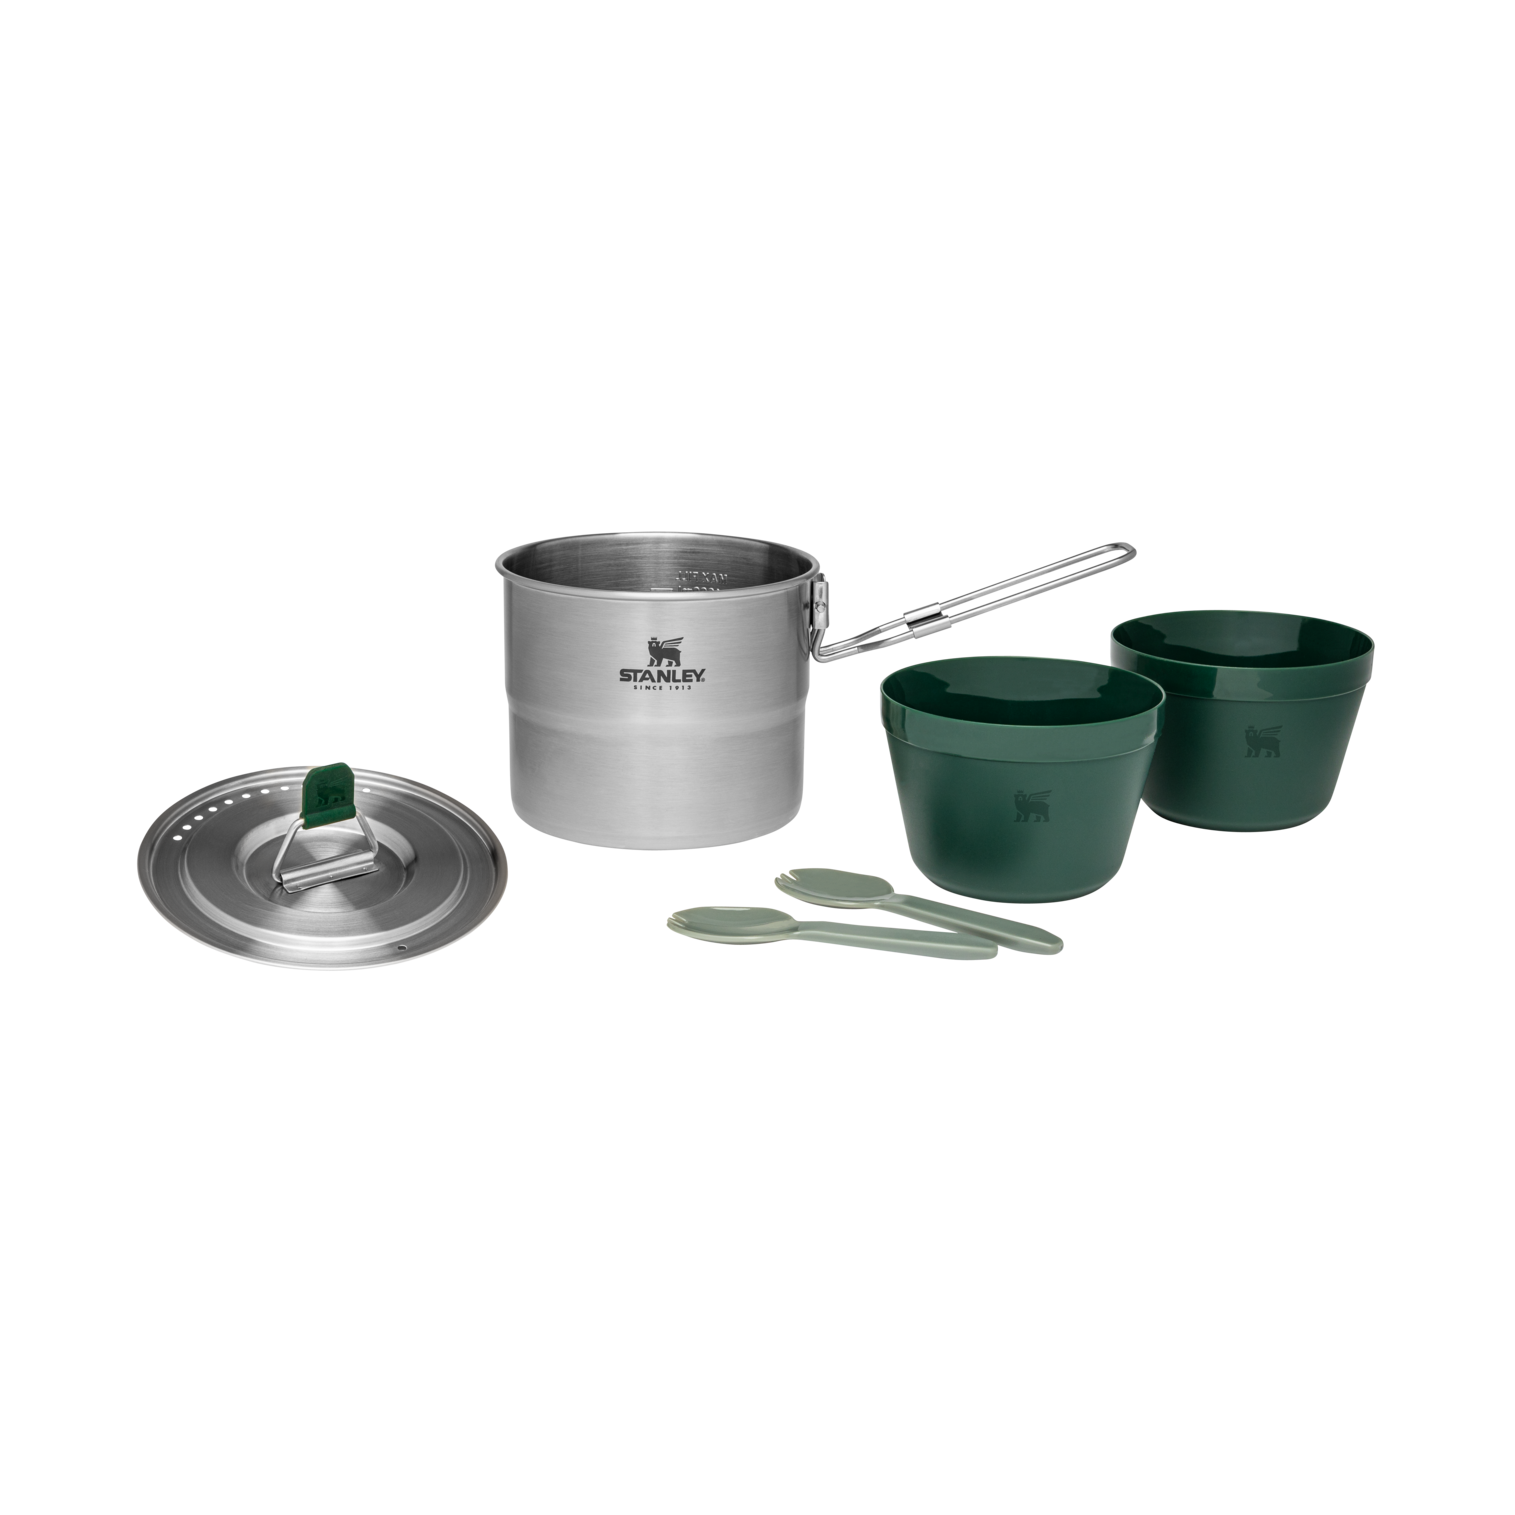 Adventure Stainless Steel Cookset For Two | 1.1 QT